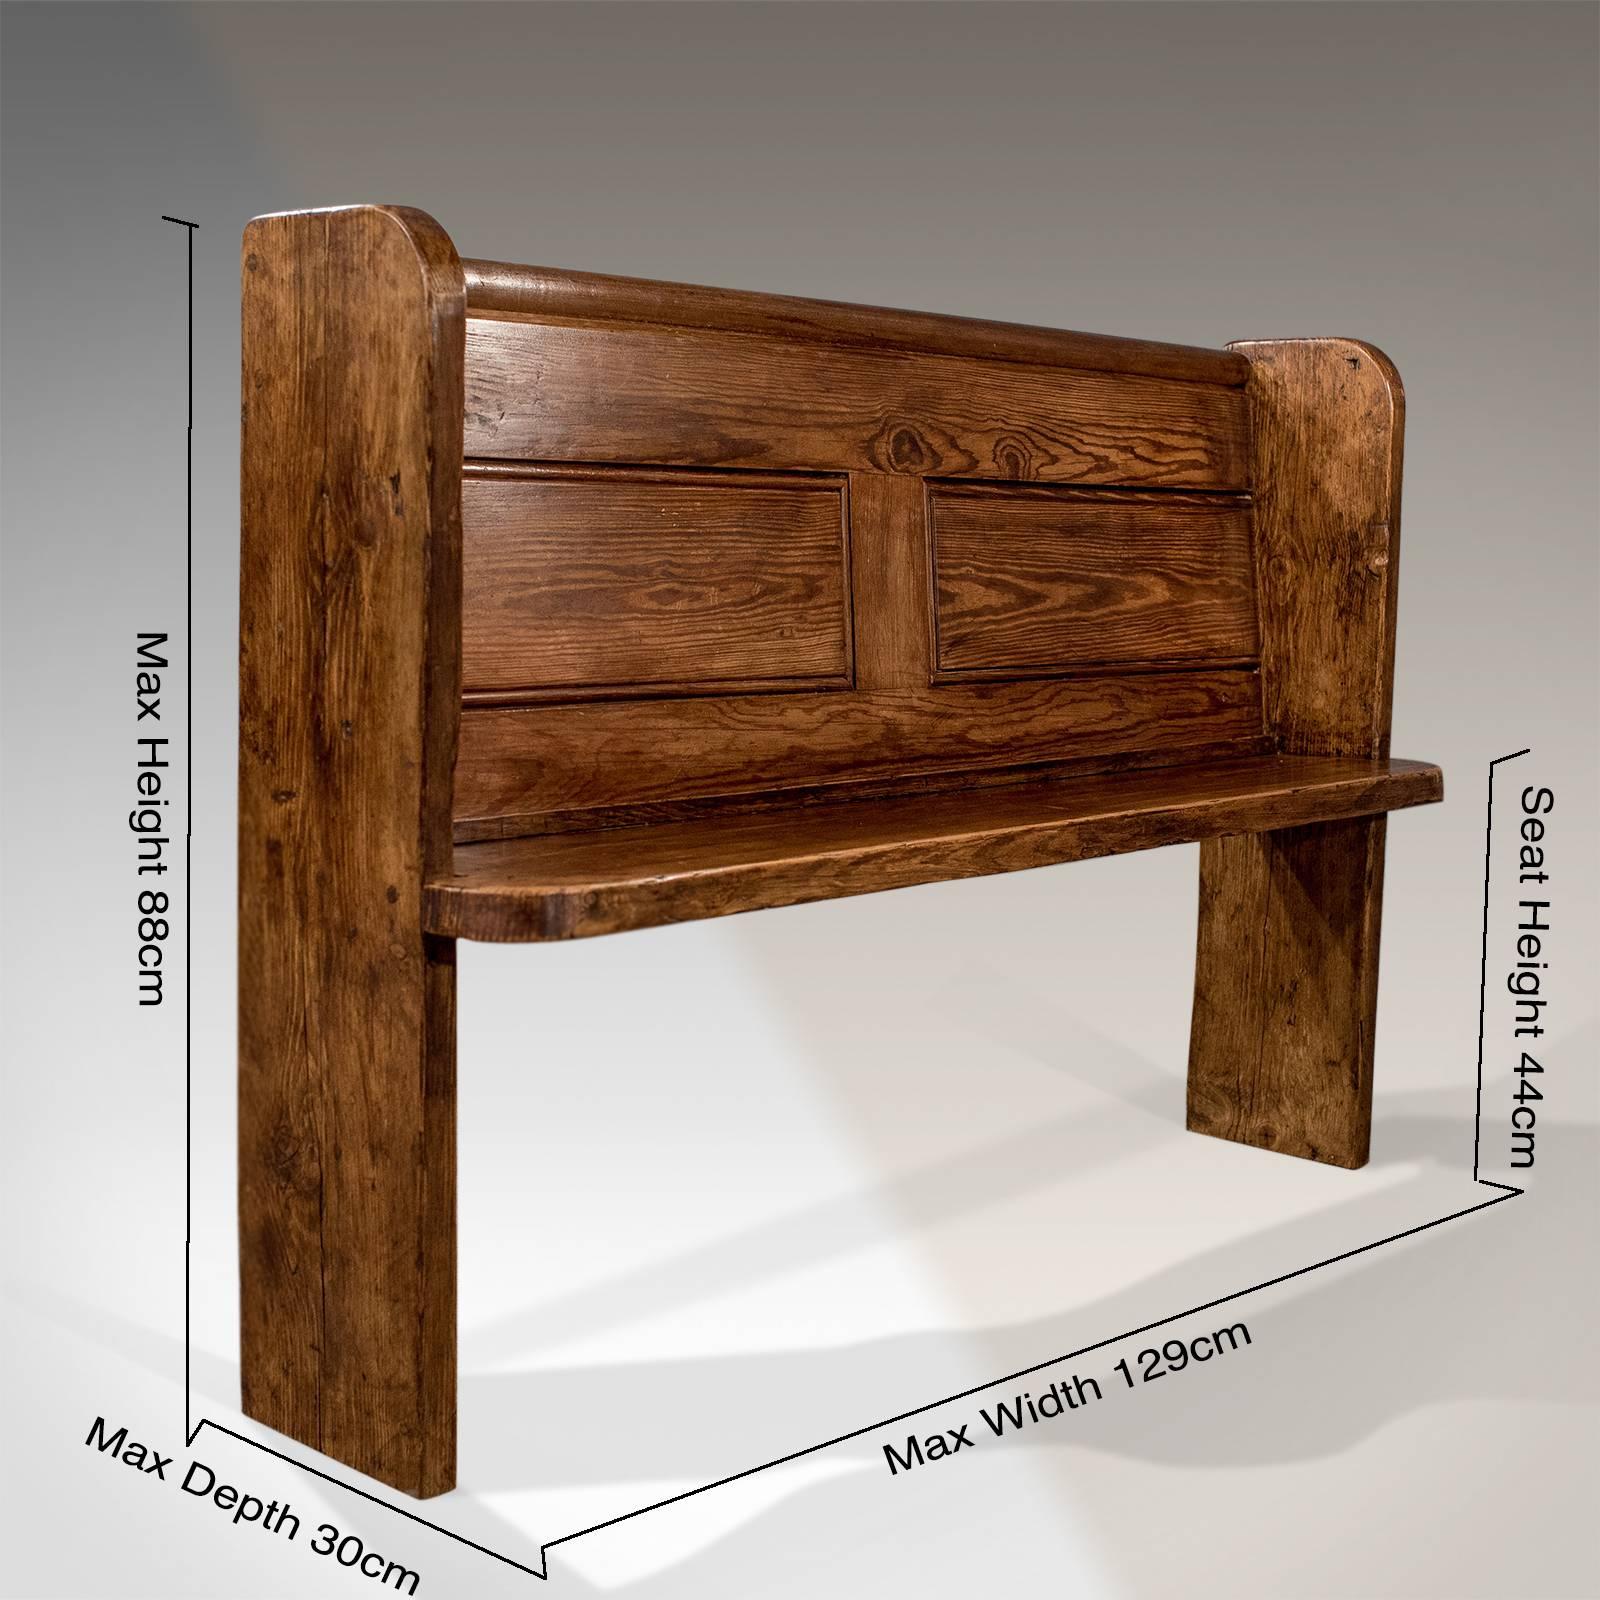 A most pleasing church pew bench seat presented in very good antique condition
Of classic form - perfect as a hall seat or kitchen bench
Delightfully crafted in thick country pine
Compact width and narrow depth 
Rising from solid stiles